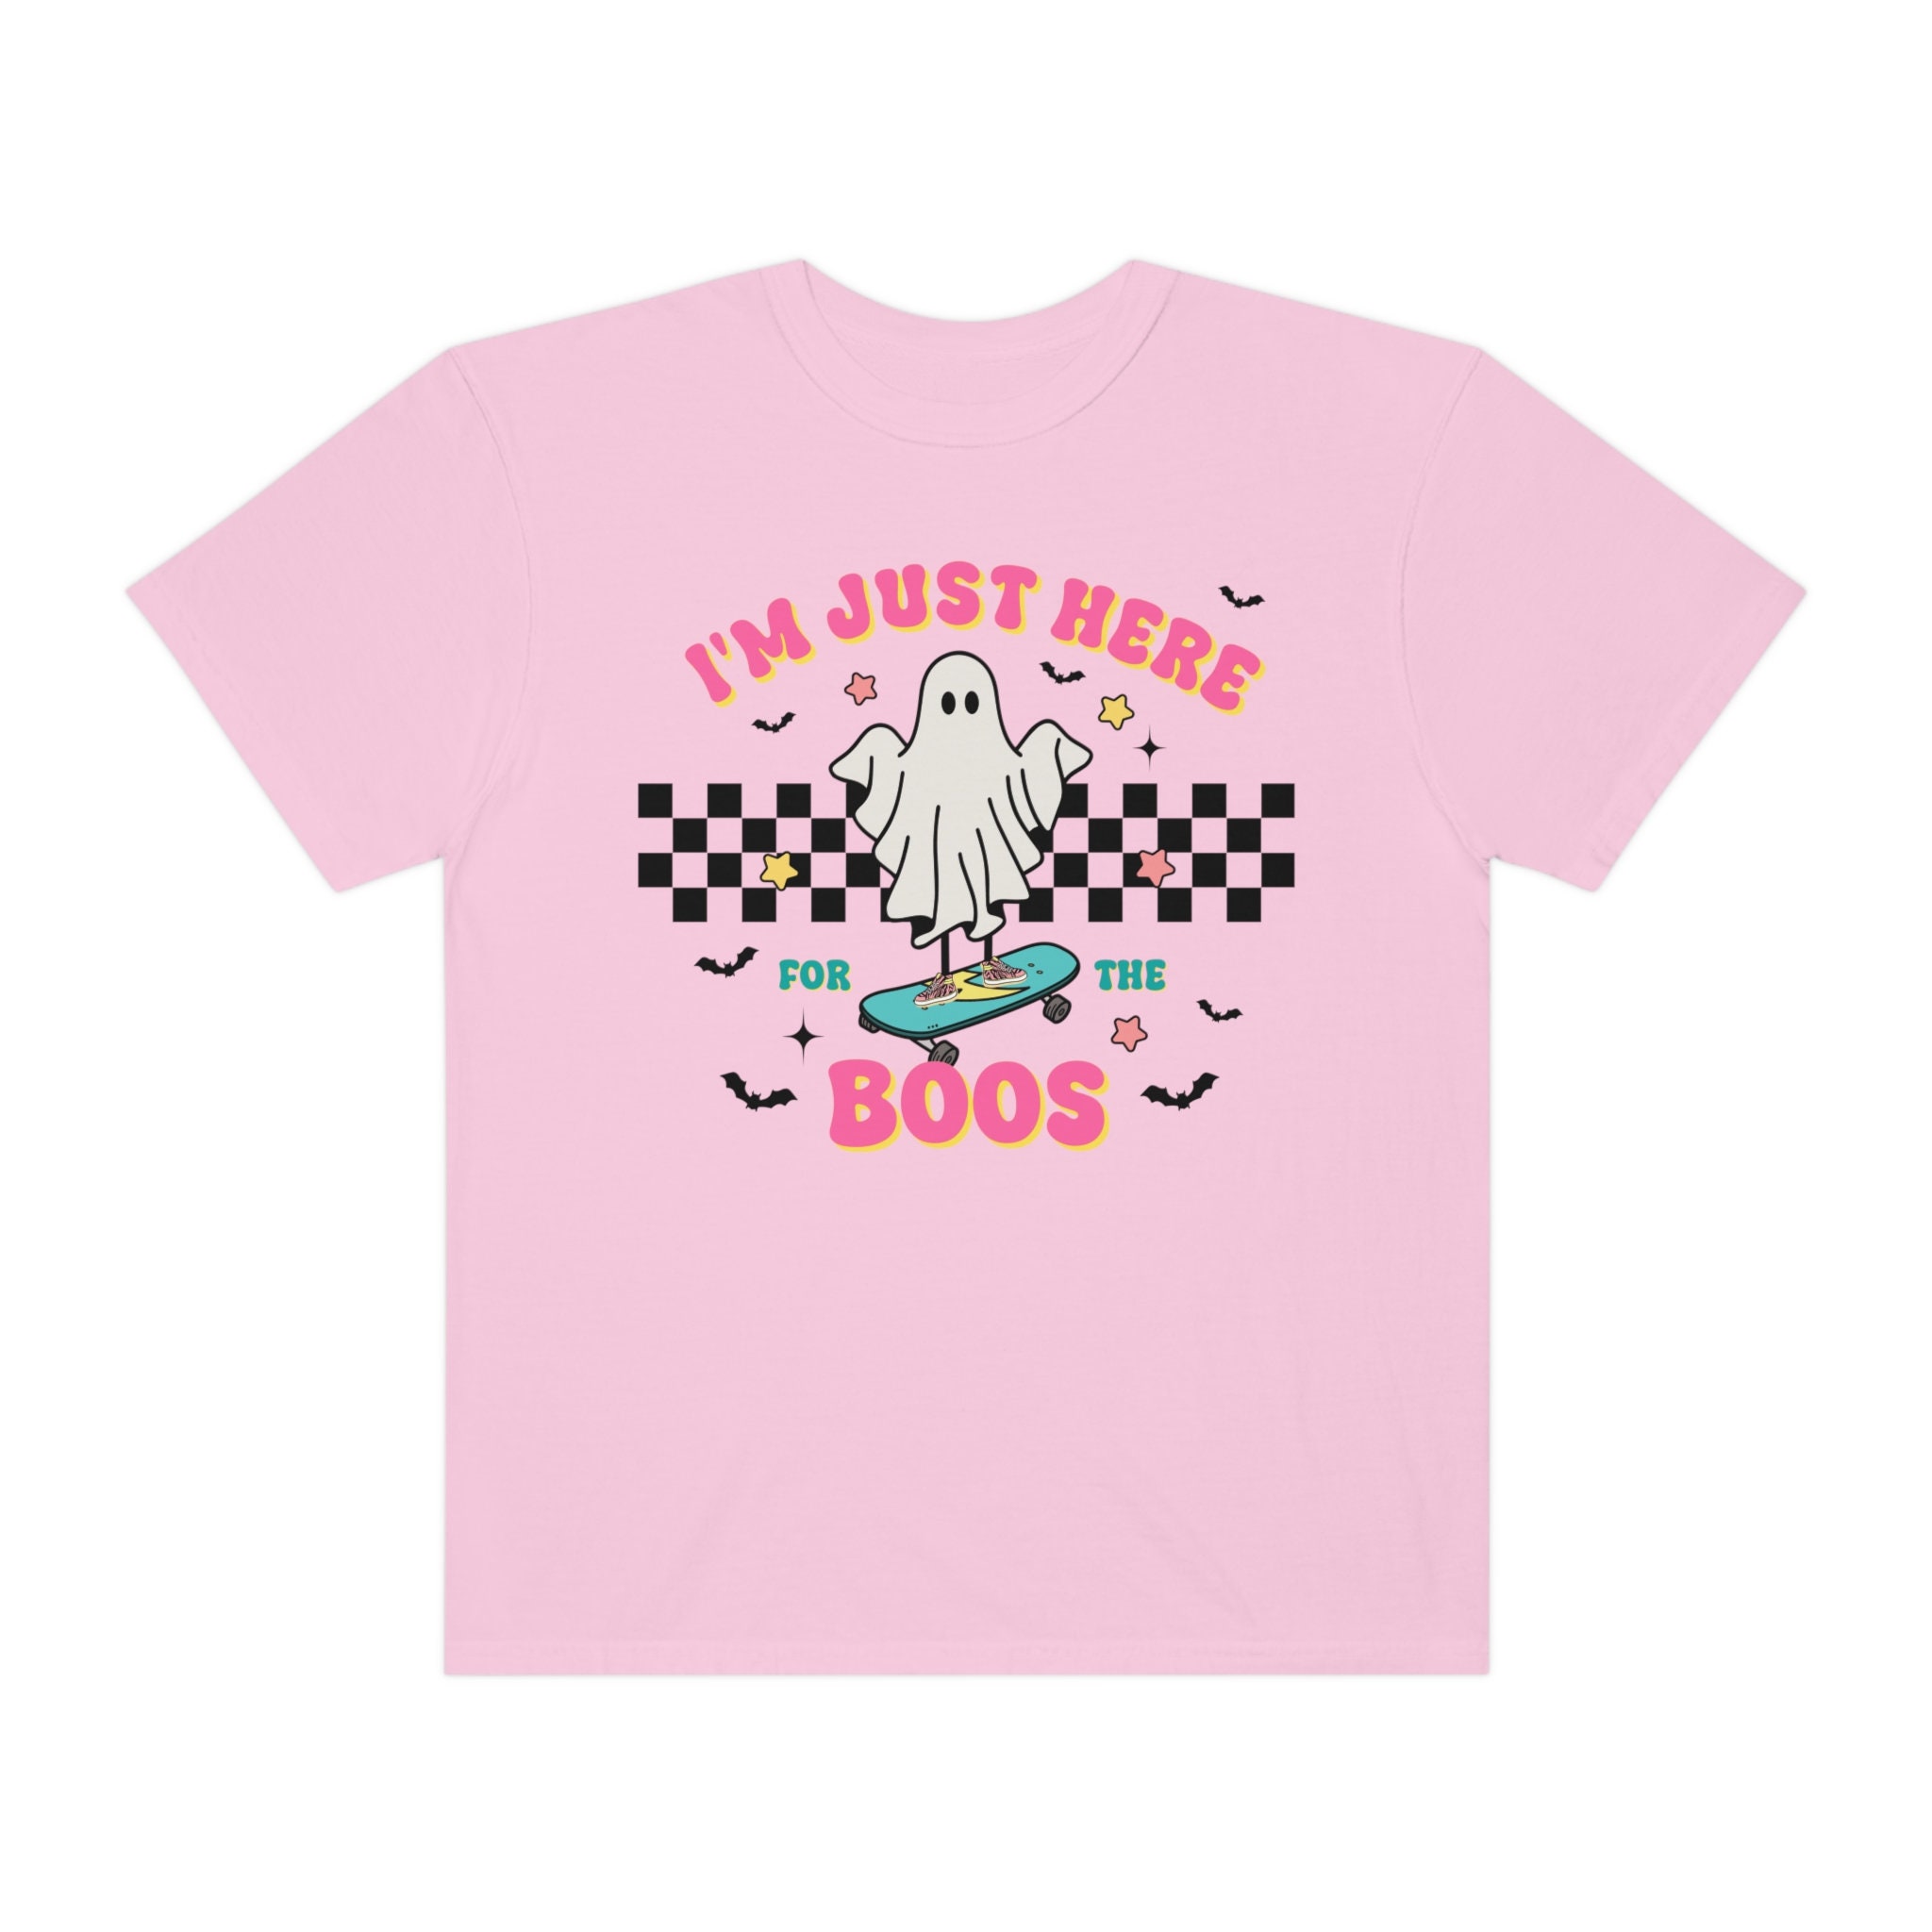 Discover  Checkered Halloween Ghost Shirt Here for the Boos Oversized  Shirt Preppy Halloween Shirt Trendy Oversized